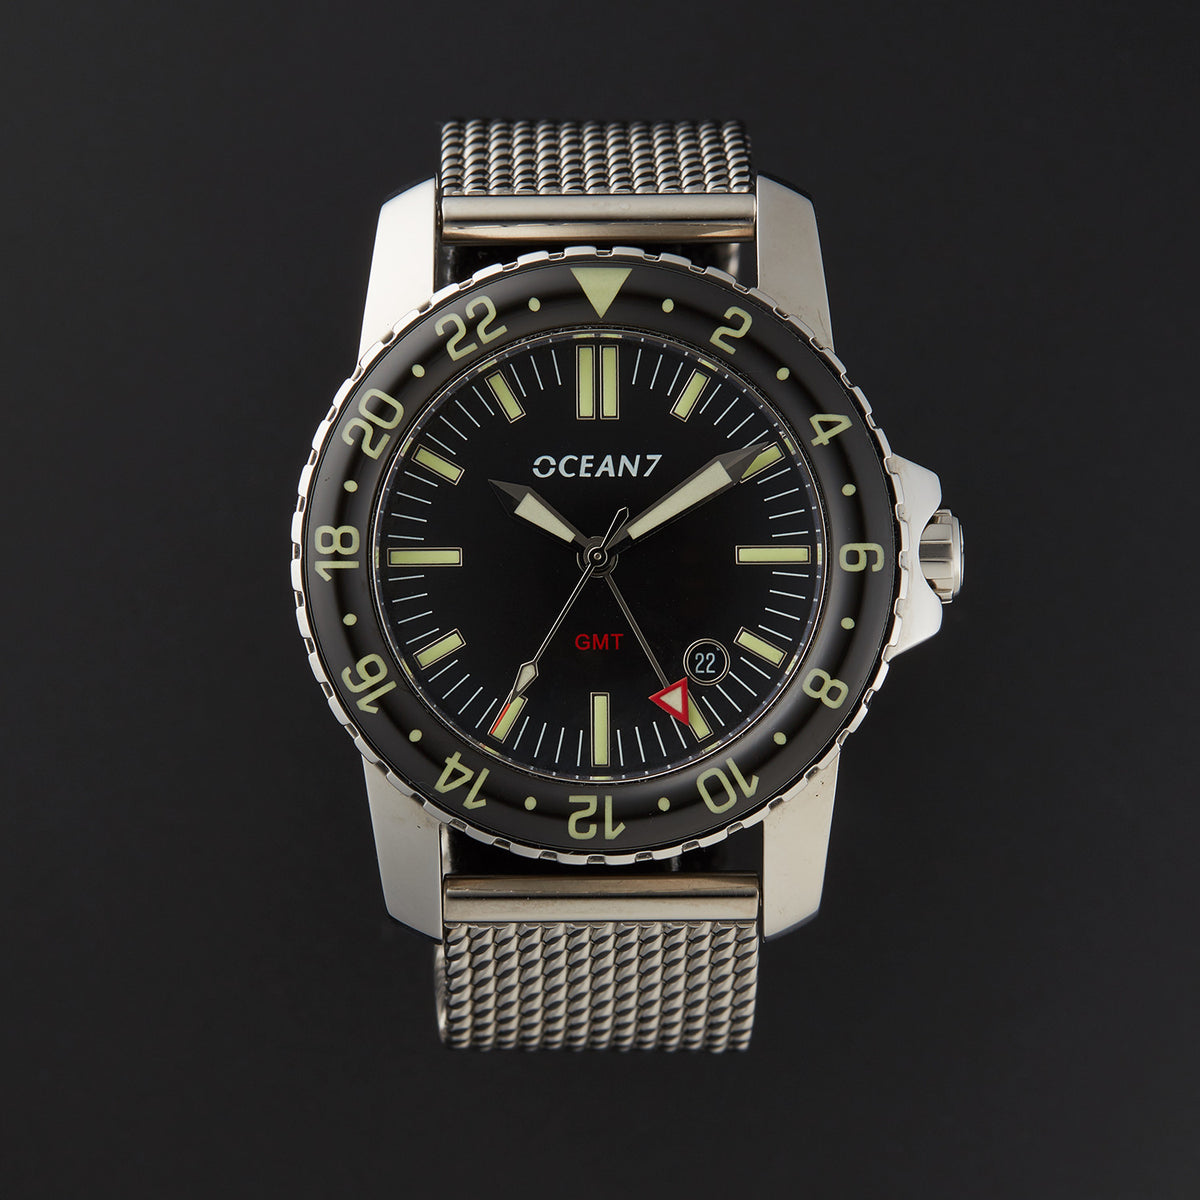 LM-5 GMT Dress Diver with Domed Sapphire Bezel